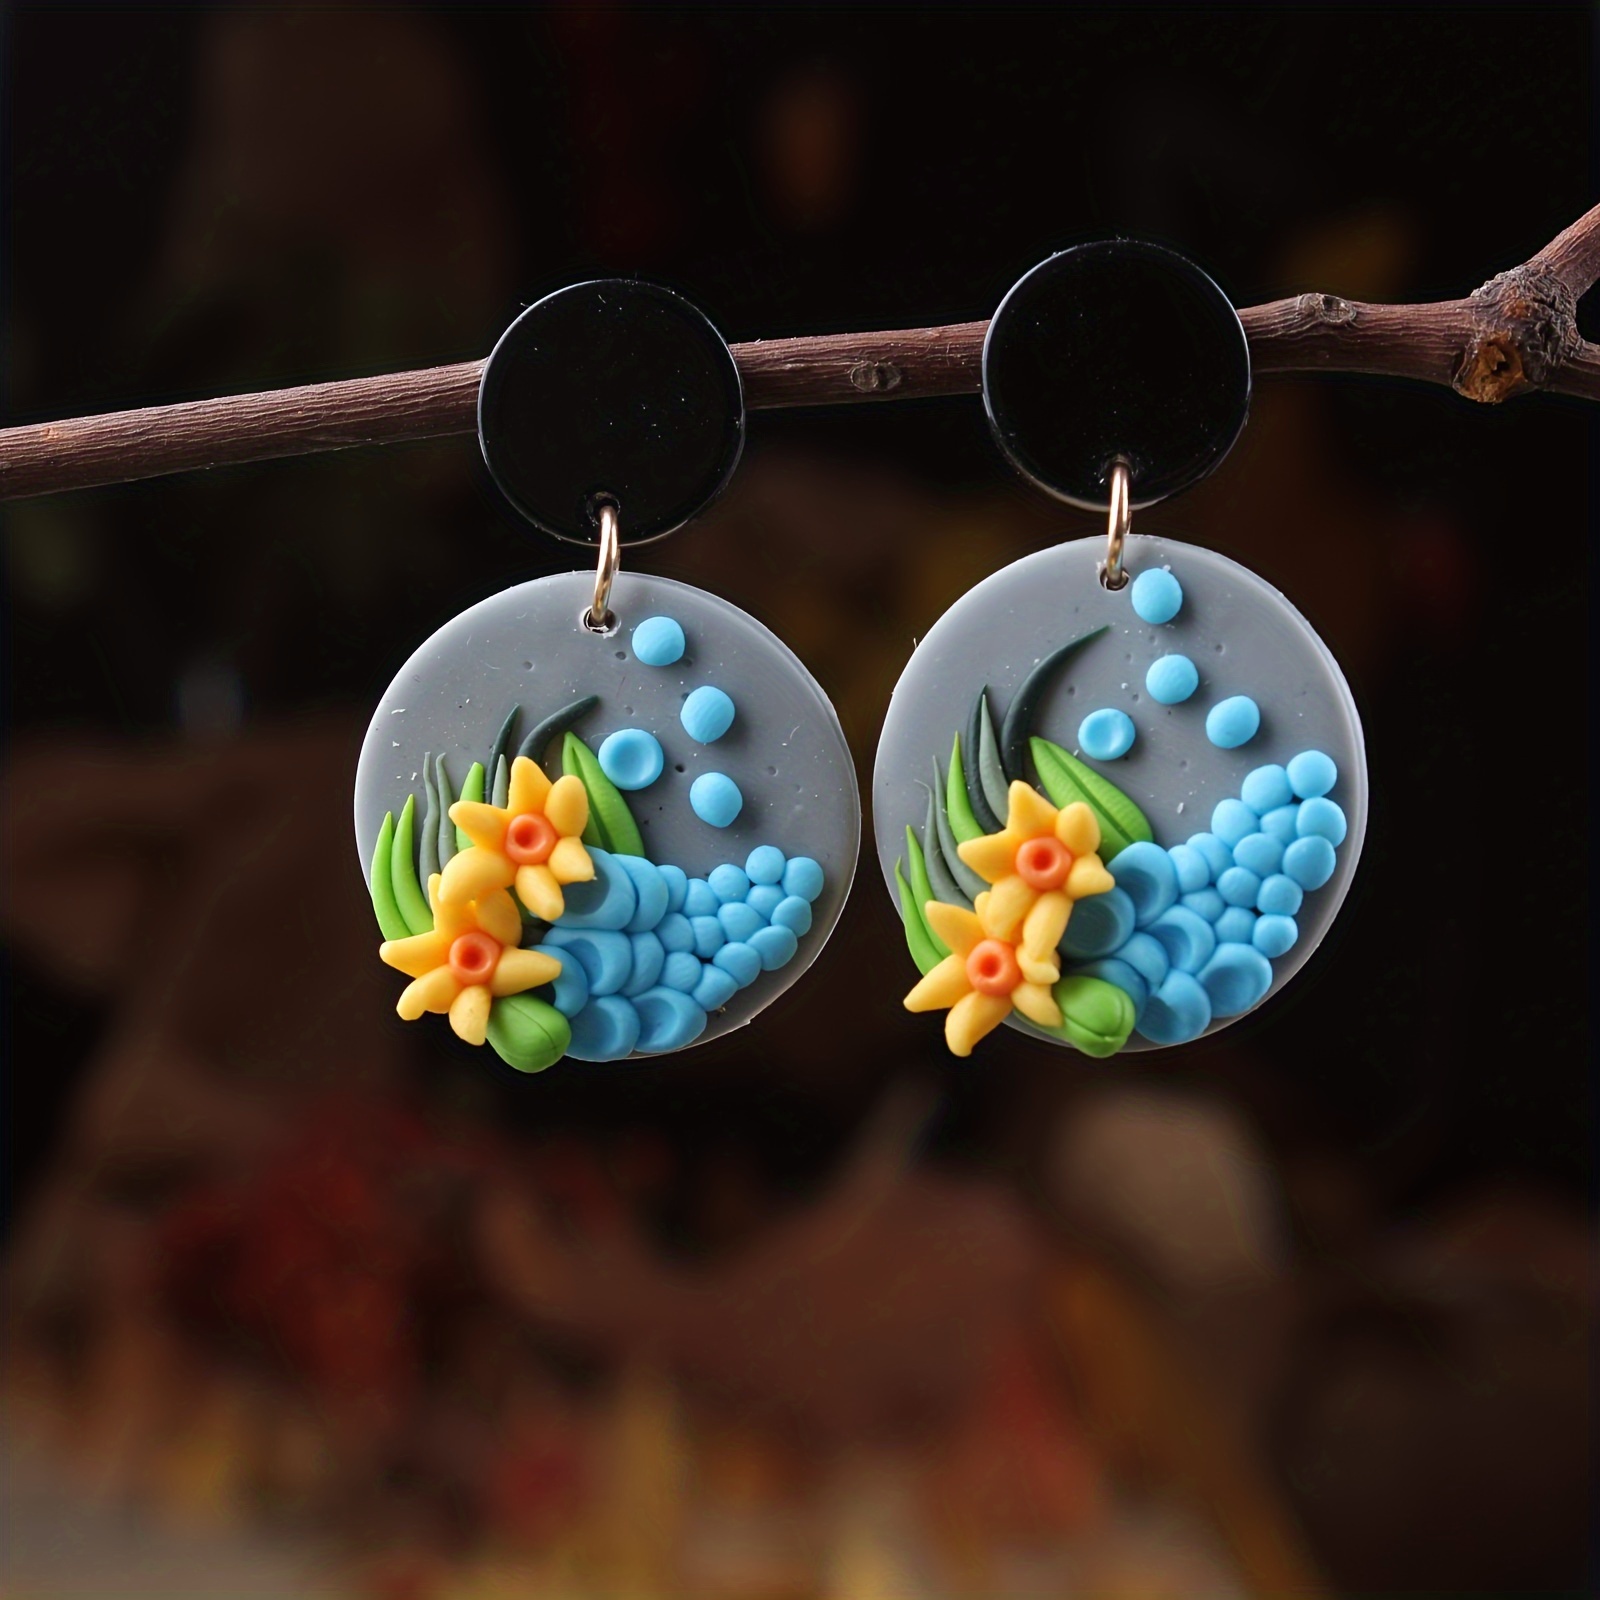 Handmade Polymer Clay Pendant Dangle Earrings with Pretty Brown Flower Simple Leisure Style Creative Gifts for Women Girls,2373,free returns&free